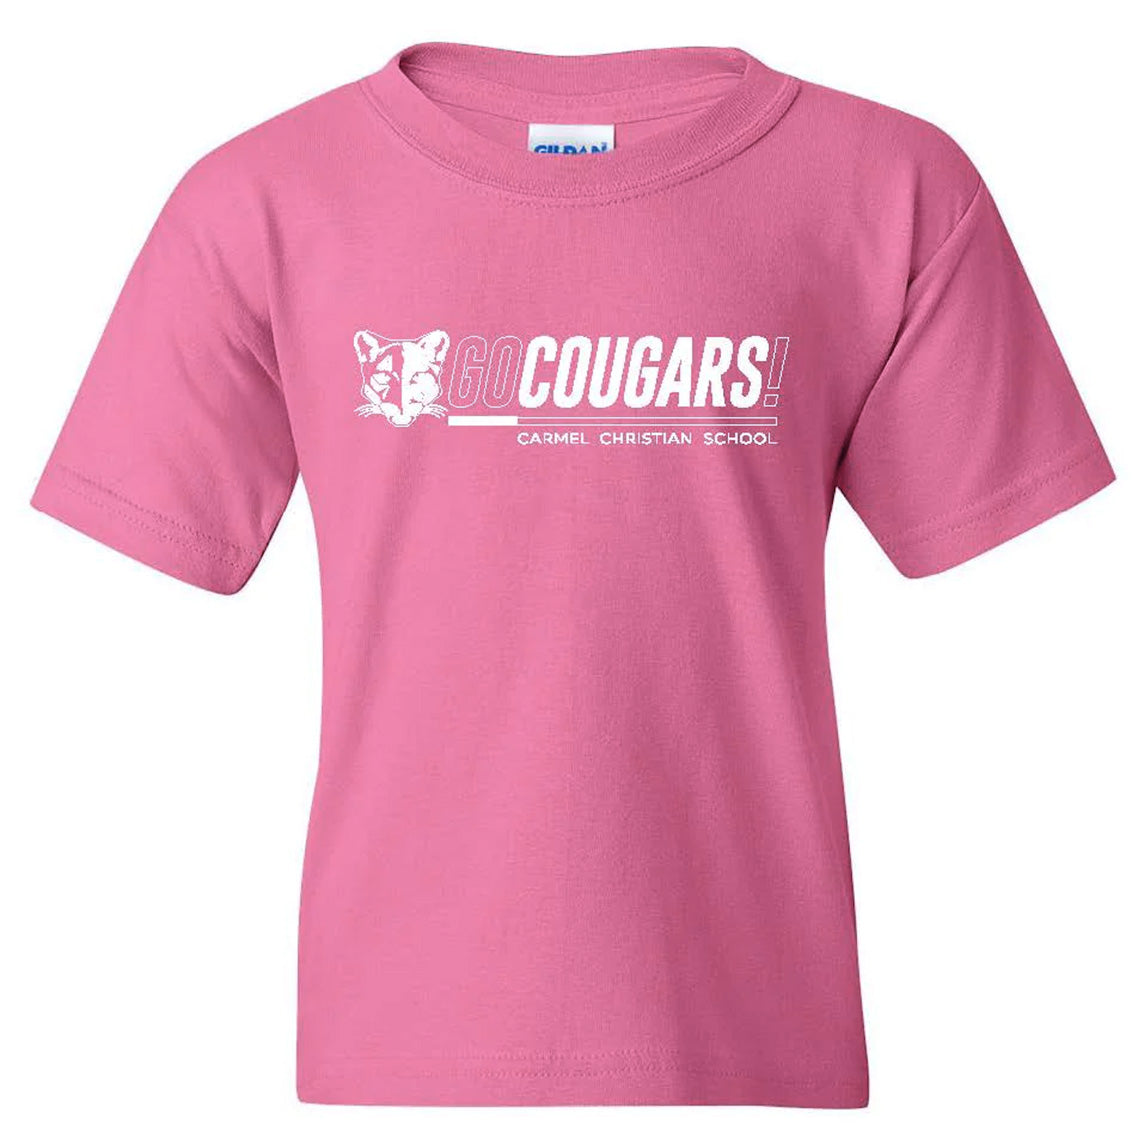 Go Cougars Tee